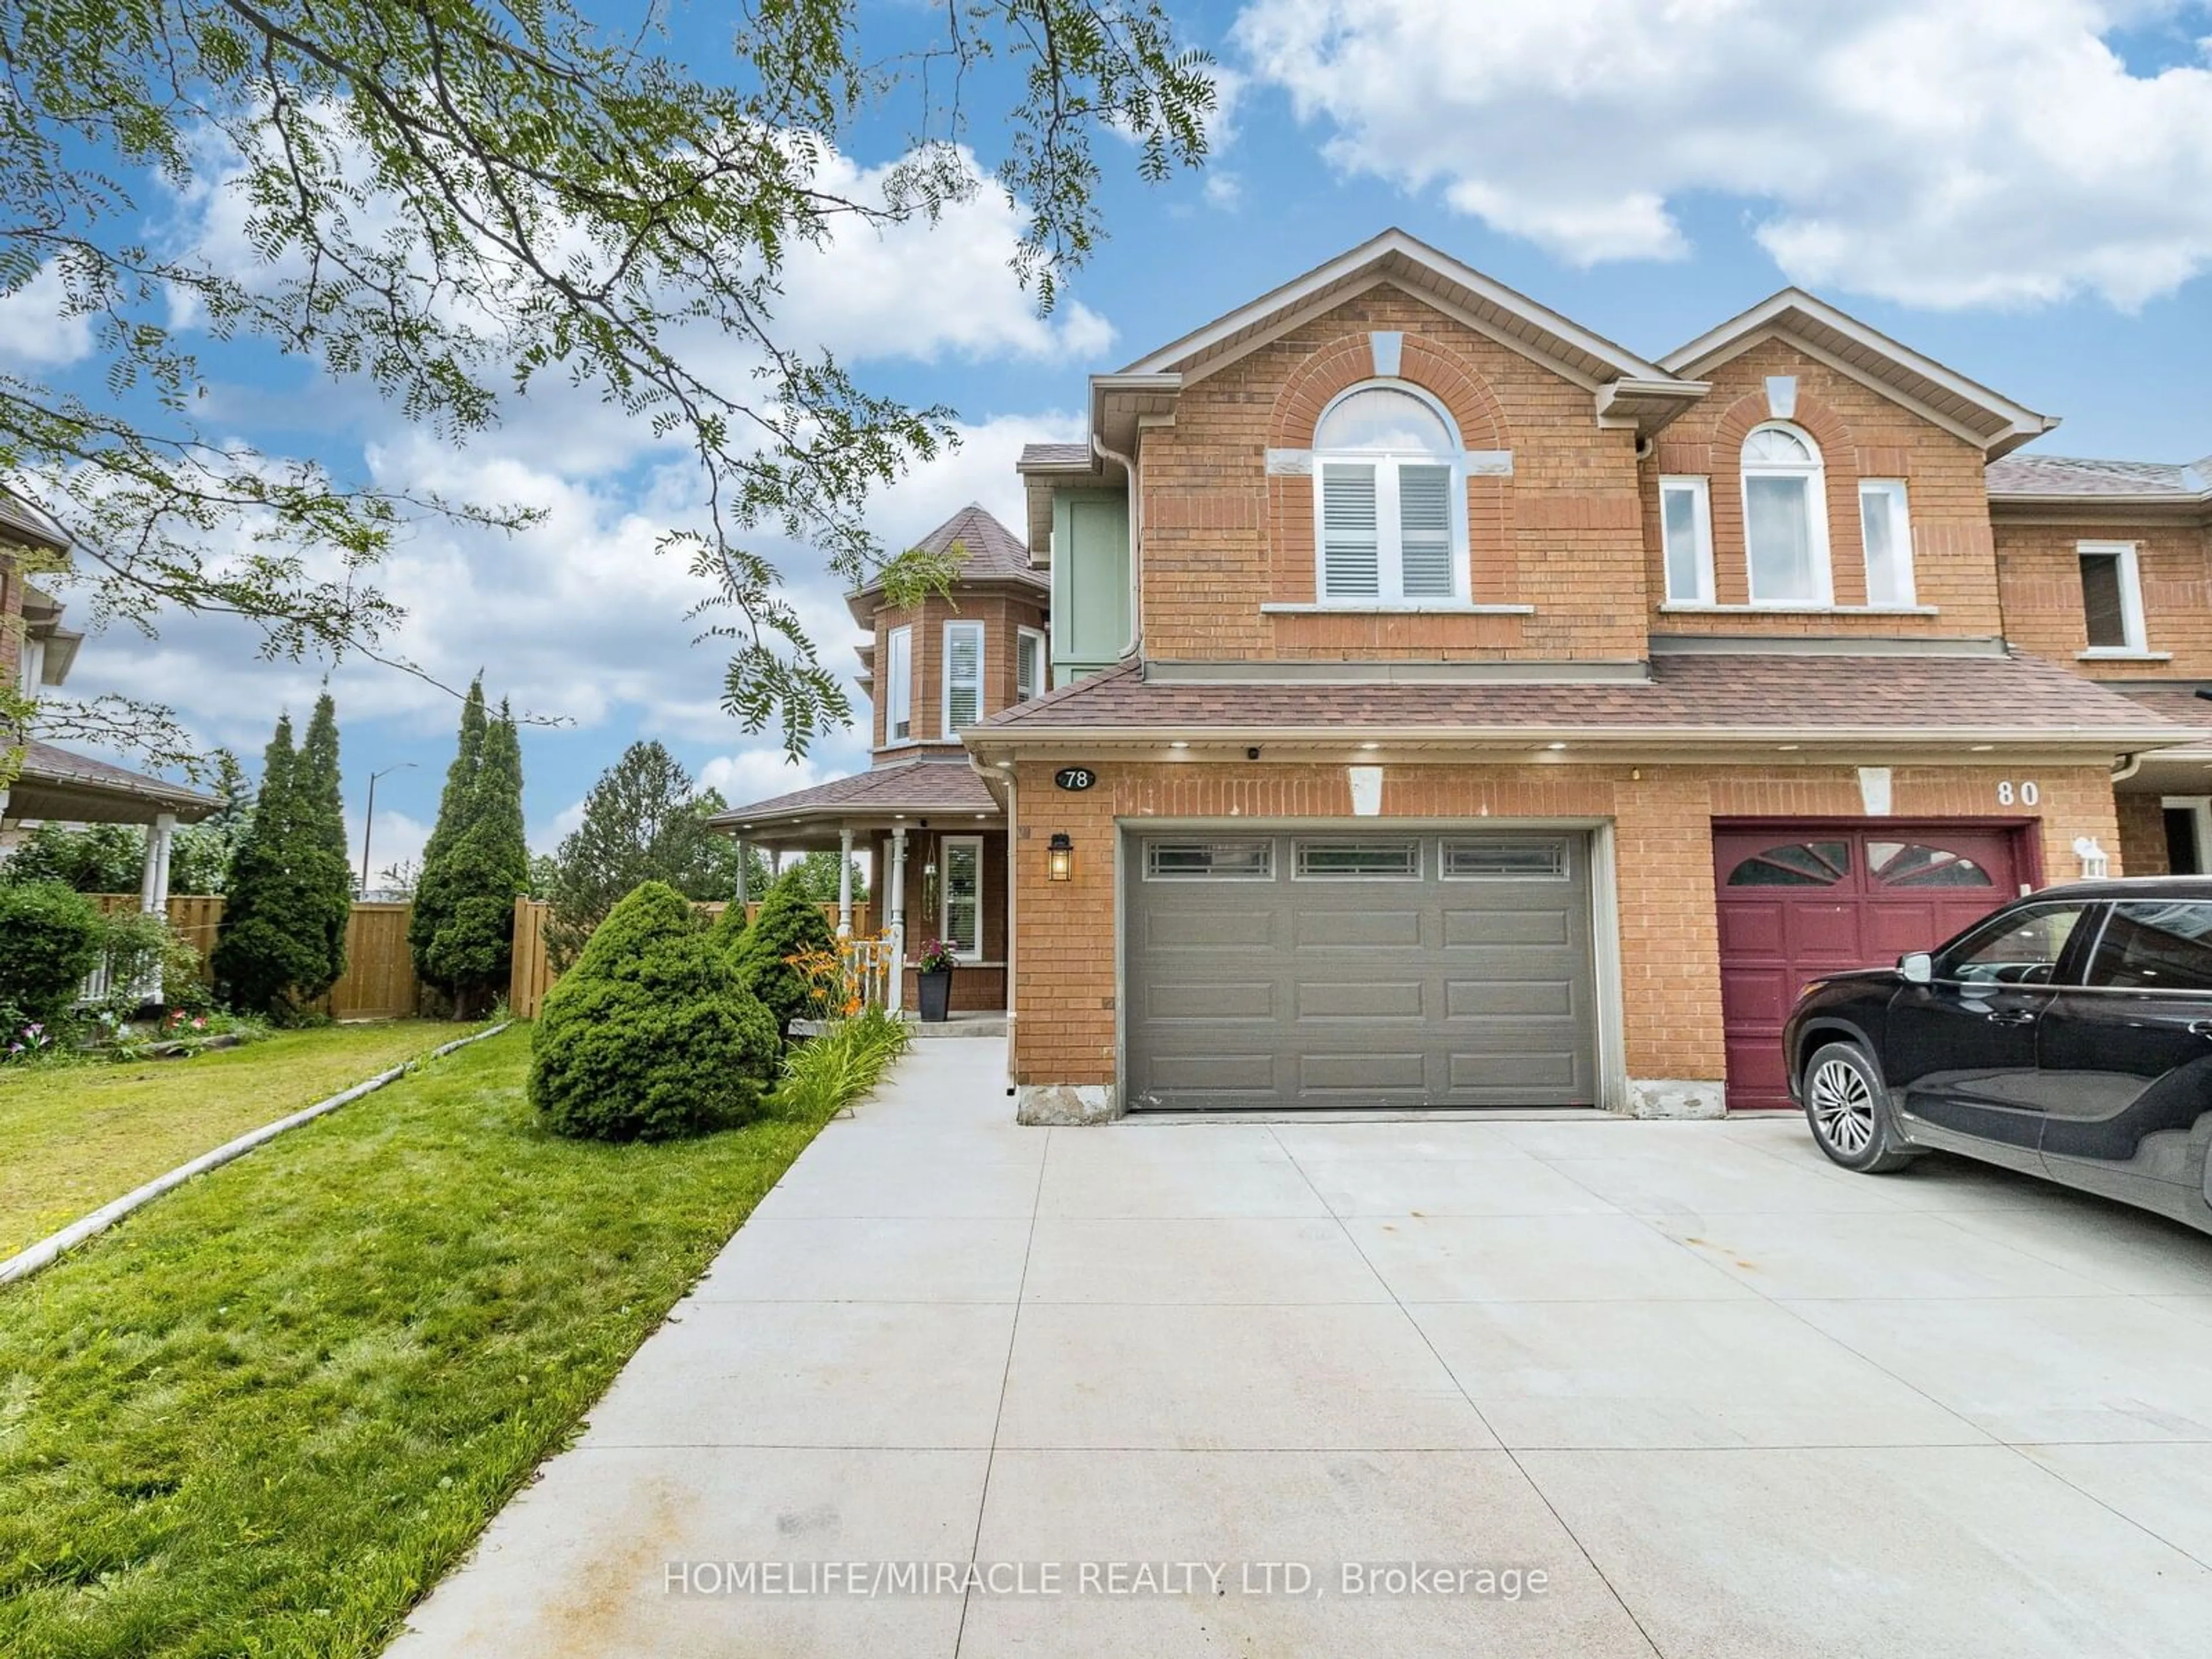 Home with brick exterior material for 78 Sandyshores Dr, Brampton Ontario L6R 2H3